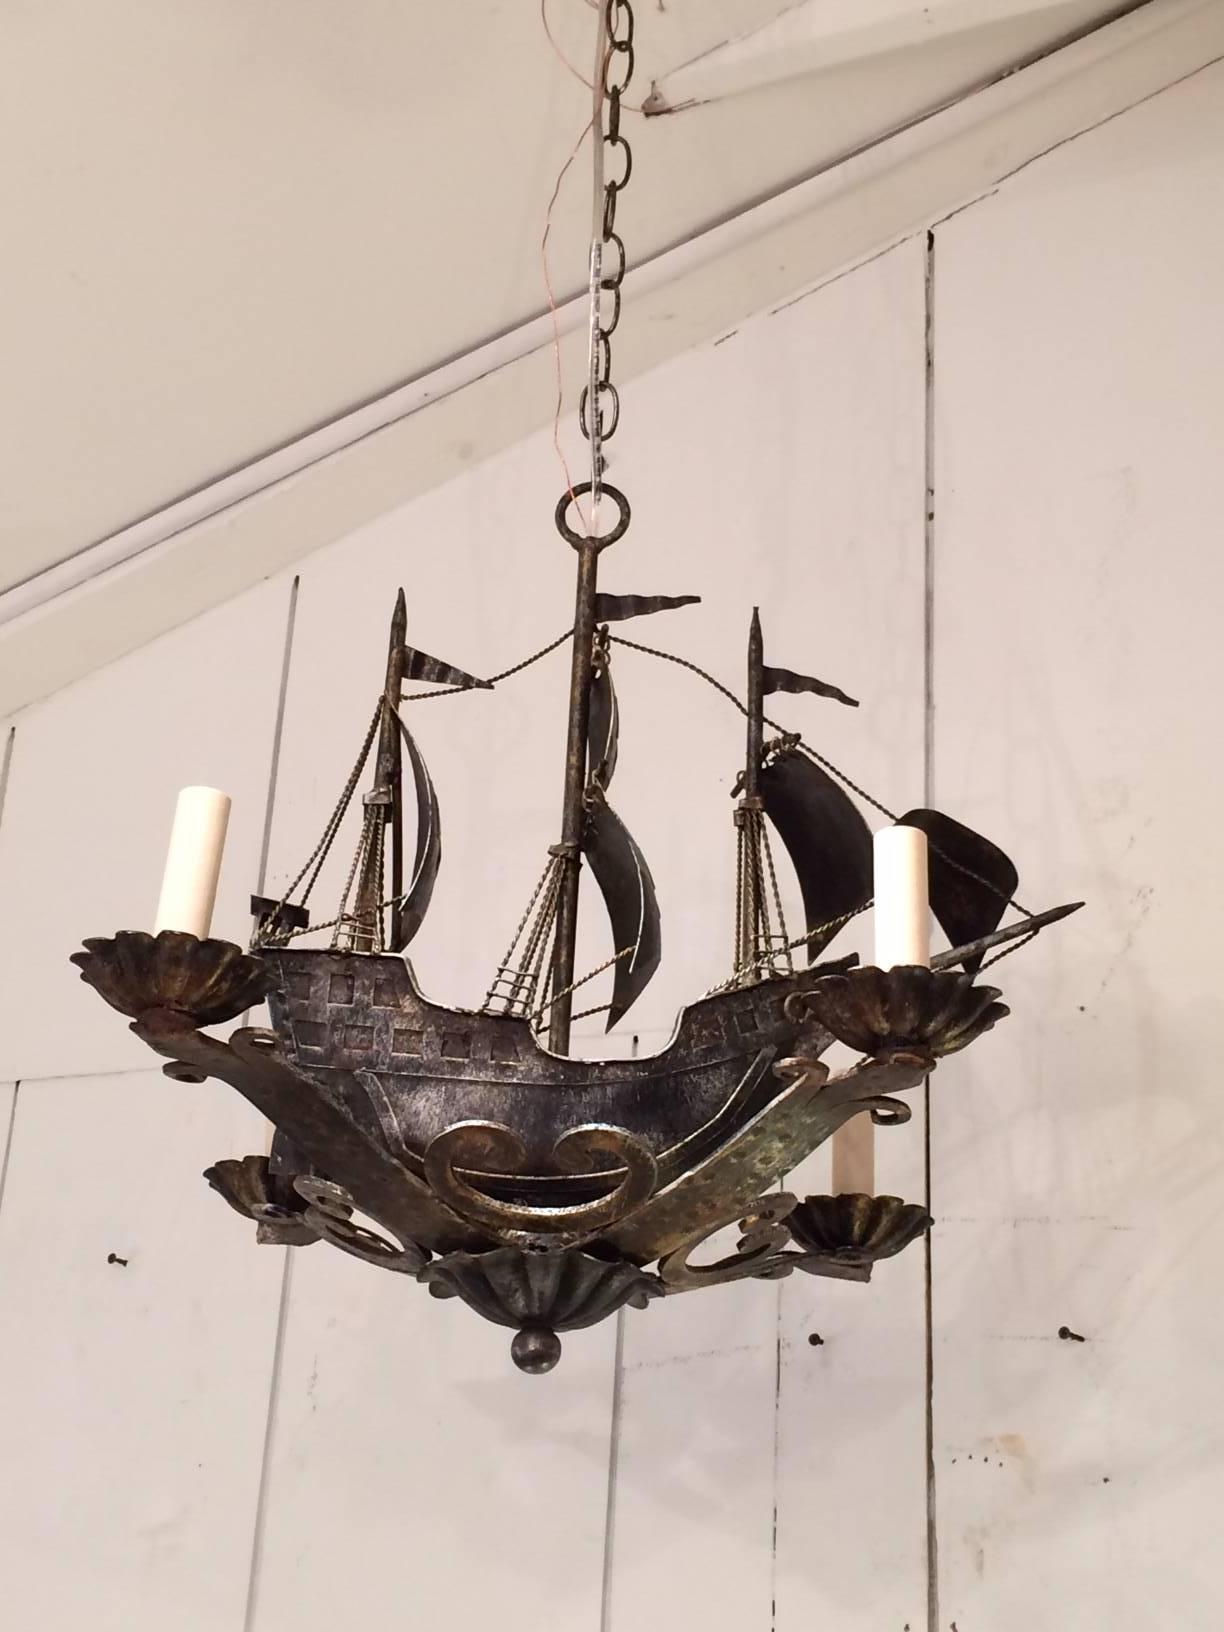 Rare pair of handmade light fixtures that are sensational old world sailing ships constructed with greyish silver aged iron, meticulous details including anchor, flags and sails. Functional chandeliers with four arms, 60 watts each and newly rewired.